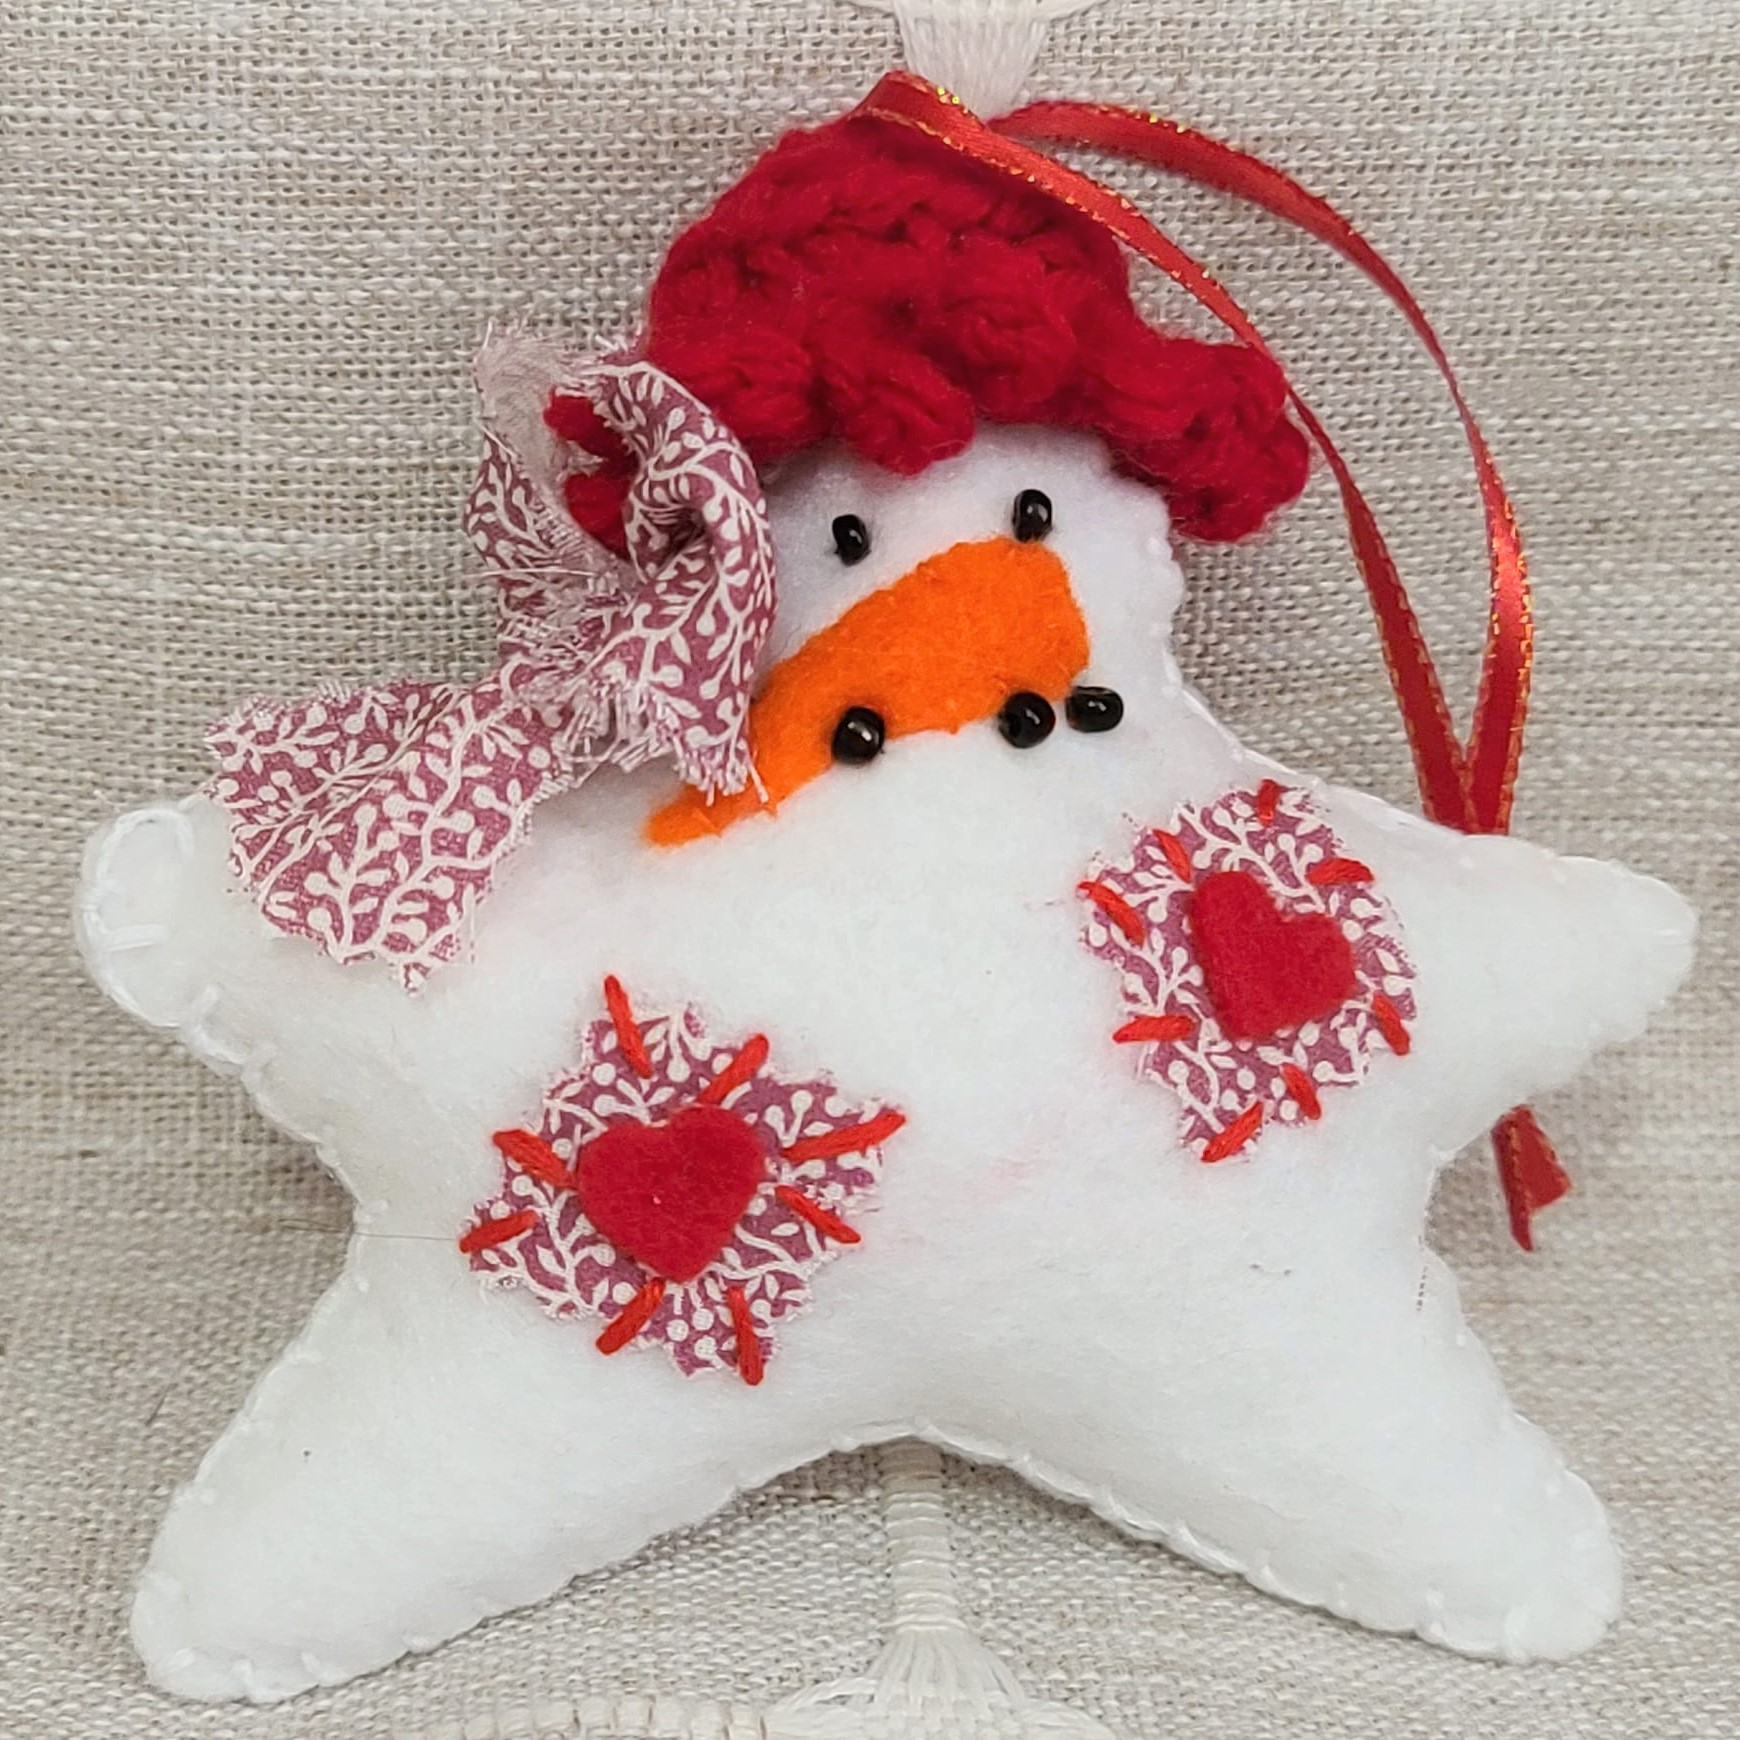 Felt Snowman star ornament with crochet hat -red patches and hat